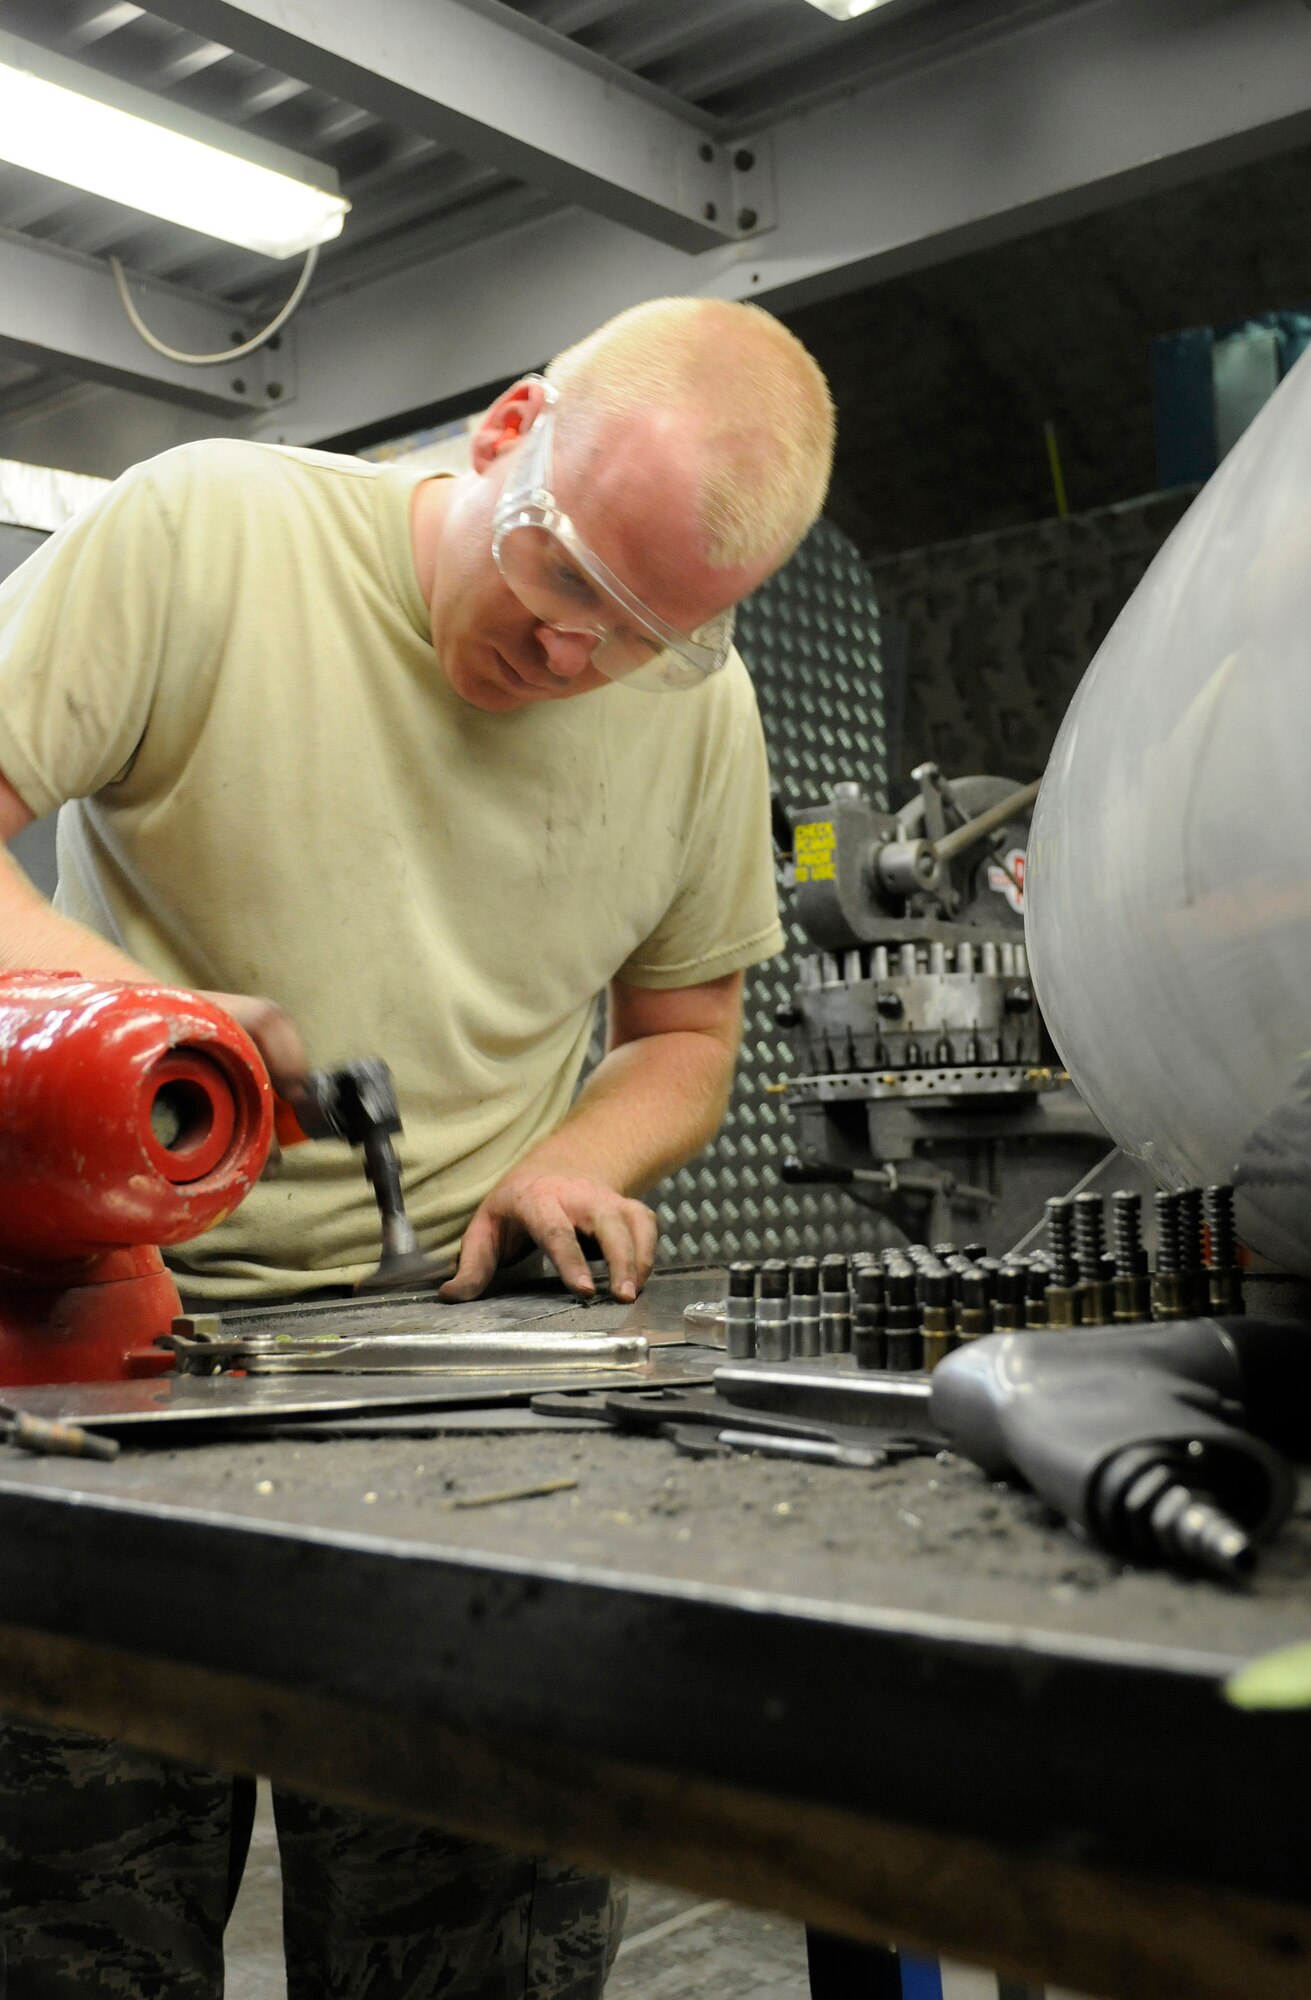 Staff Sgt. Ben Beermann, 379th Expeditionary Maintenance Squadron, Fabrication Flight, smoothes out rivet hole edges of a patch he created Sep. 1, 2008, at an undisclosed air base in Southwest Asia. Sergeant Beermann, grinds the corner, smoothing out the edge of the patch that will fix a crack in an E-8C Joint Surveillance and Target Attack Radar System (JSTARS) aircraft cowling.  The non-flush patch provides structural integrity and keeps the elements out.  He measured, cut, punched in rivet holes and then smoothed out all the rough edges before attaching the patch to the cowling.  The JSTARS platform provides an airborne battle management, command and control, intelligence, surveillance and reconnaissance platform supporting Operations Iraqi and Enduring Freedom and Joint Task Force-Horn of Africa.  Its primary mission is to provide theater ground and air commanders with ground surveillance to support attack operations and targeting that contributes to the delay, disruption and destruction of enemy forces.  Sergeant Beermann, a native of Dakota City, Neb., is deployed from Robins Air Force Base, Ga.  (U.S. Air Force Base photo by Tech. Sgt. Michael Boquette/Released)